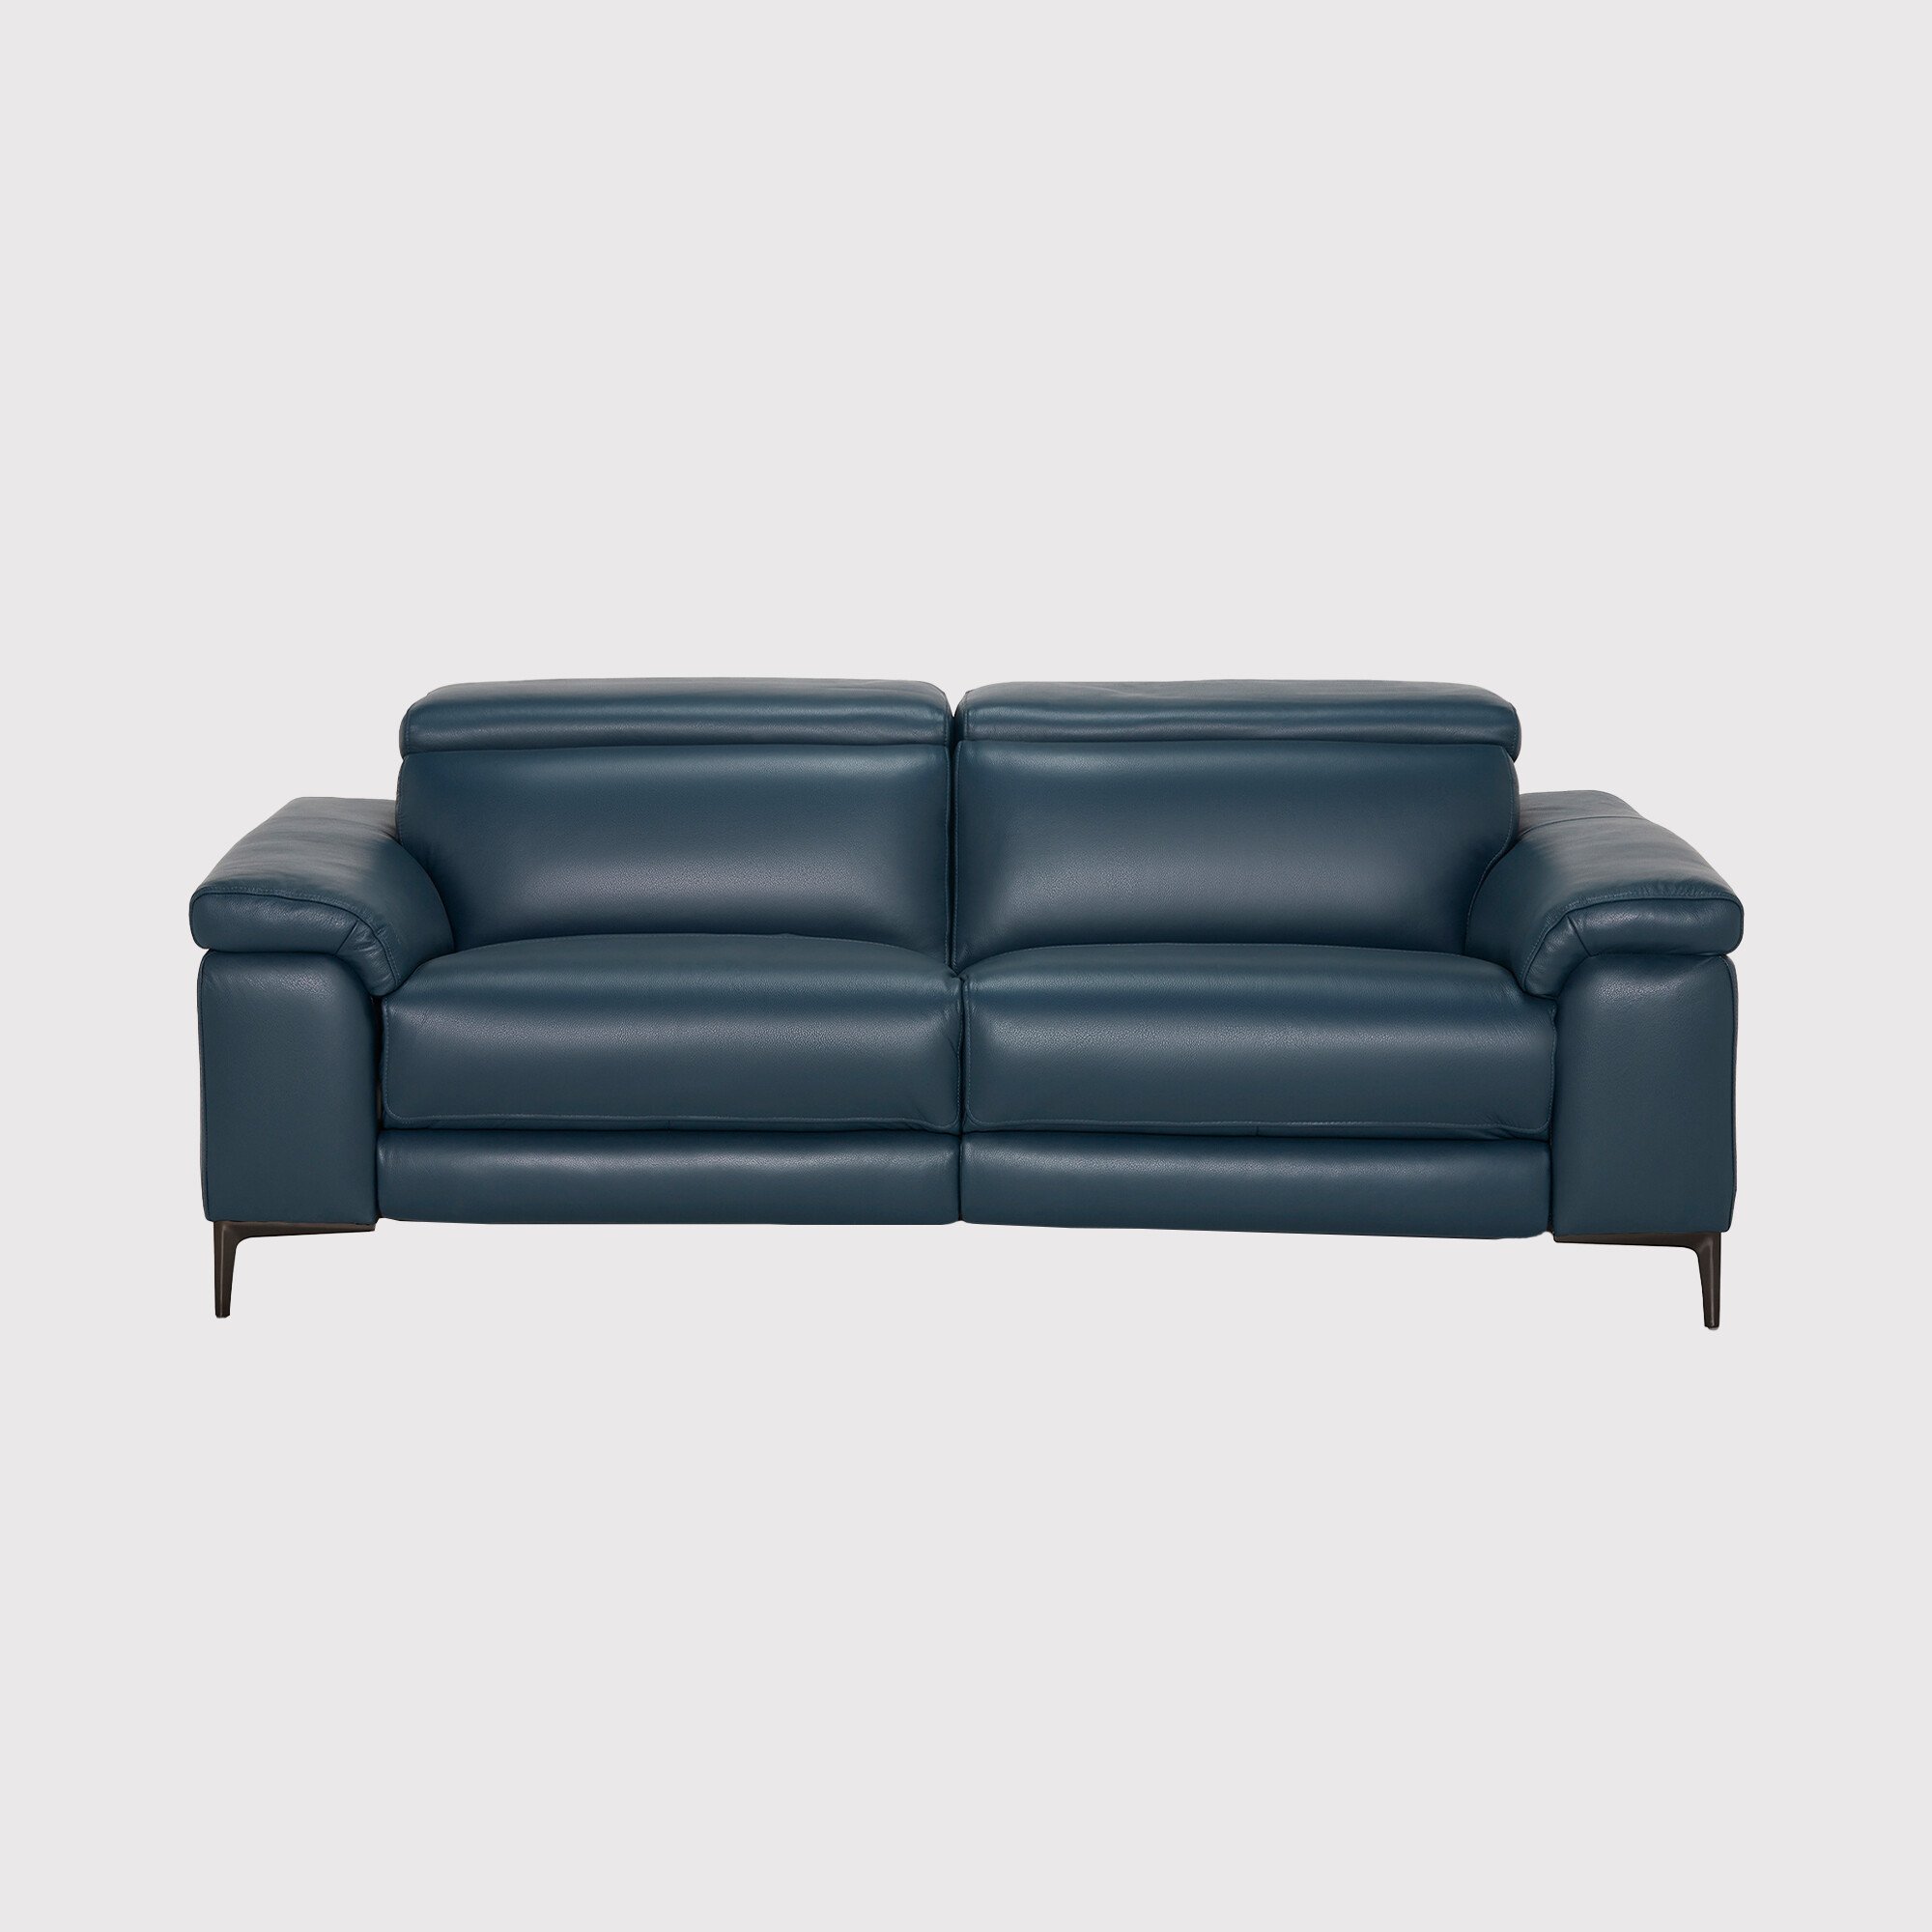 Paolo 3 Seater Electric Recliner Sofa 2 Headrests, Blue Leather | Barker & Stonehouse